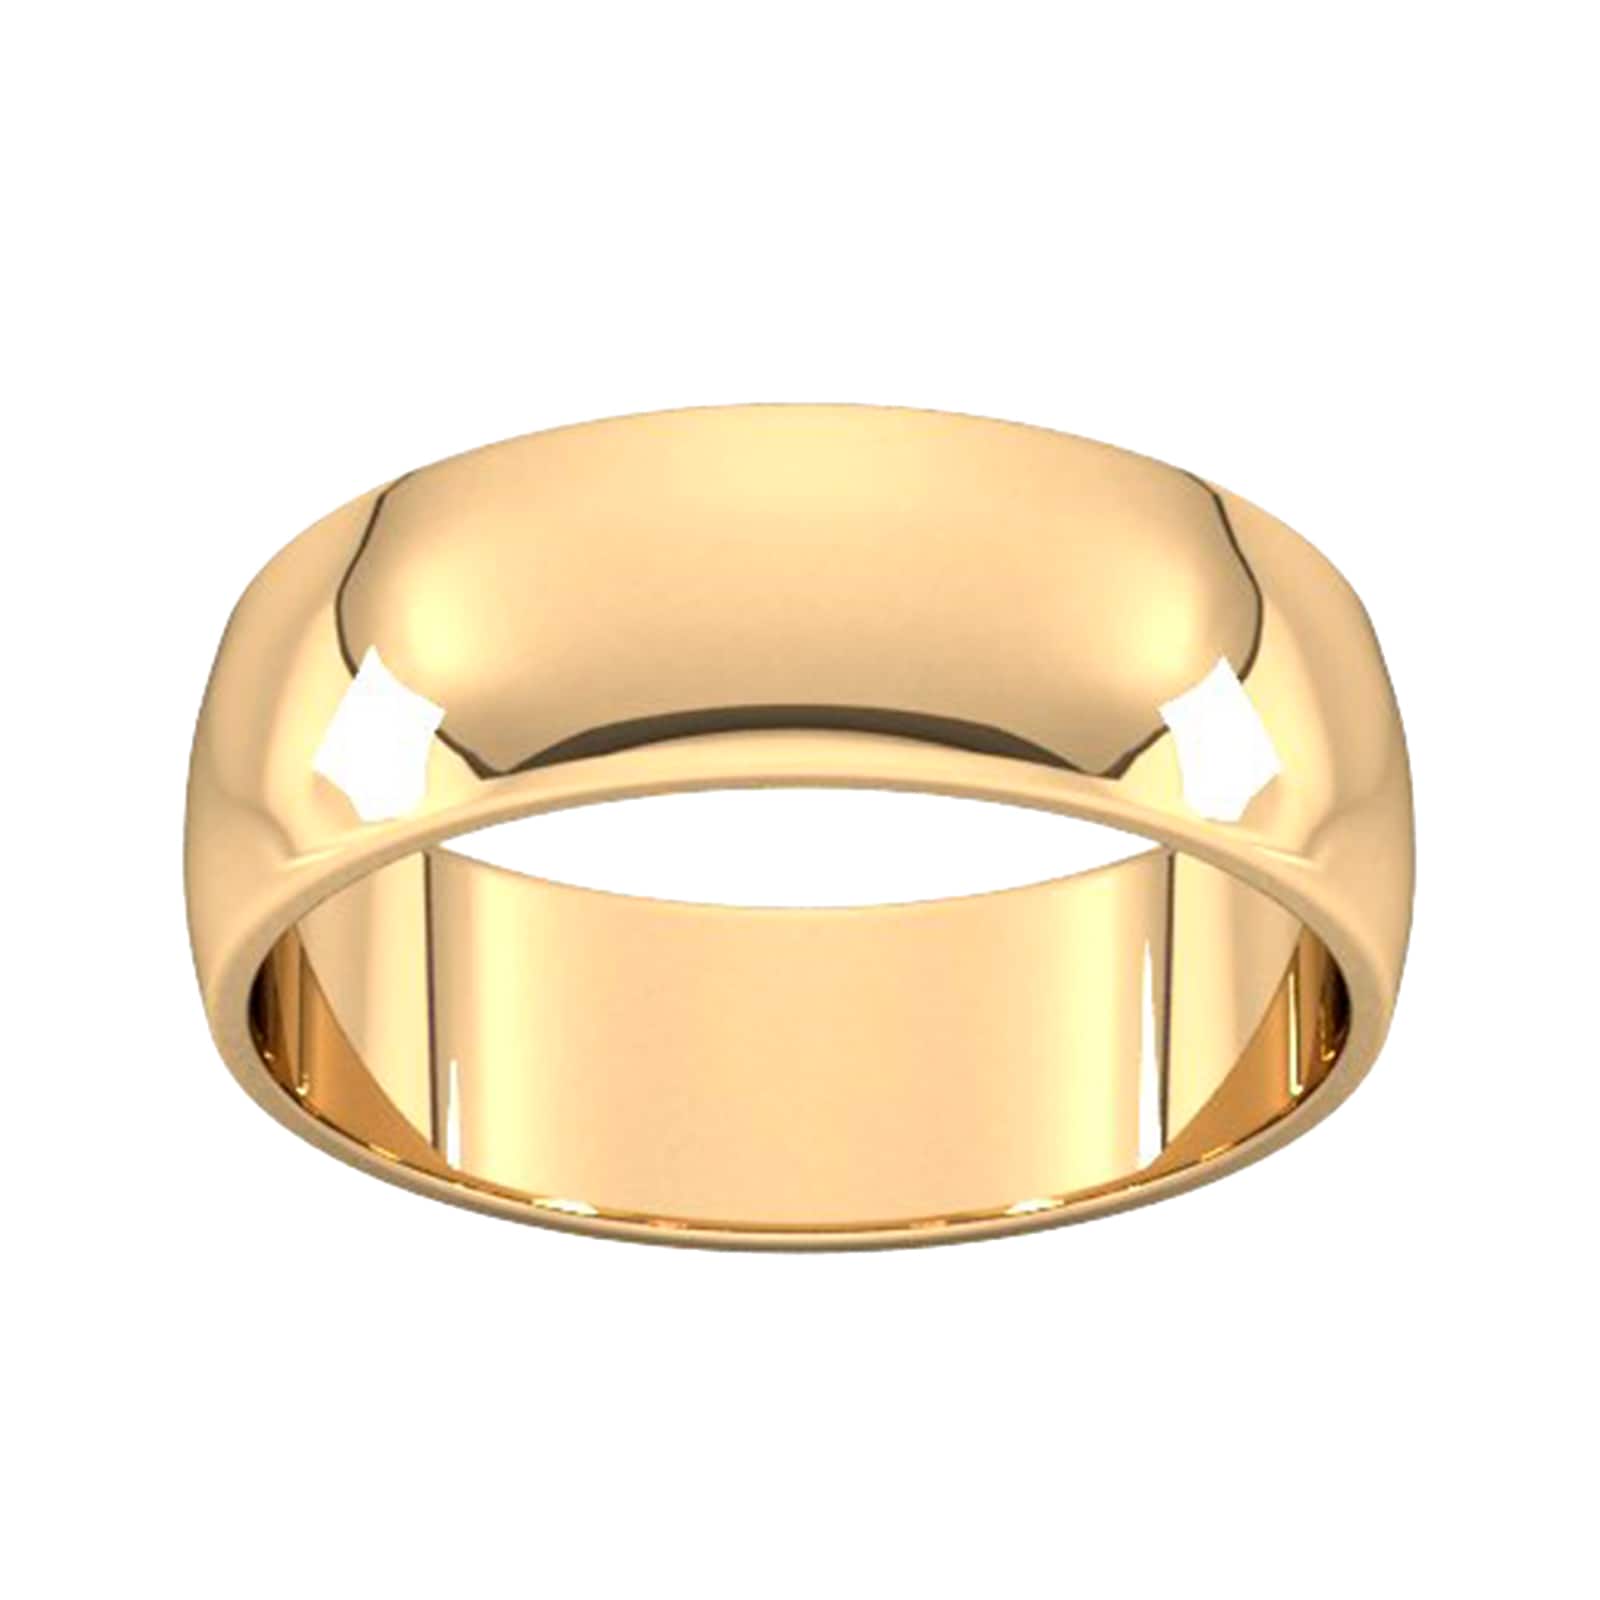 7mm D Shape Standard Wedding Ring In 18 Carat Yellow Gold - Ring Size N